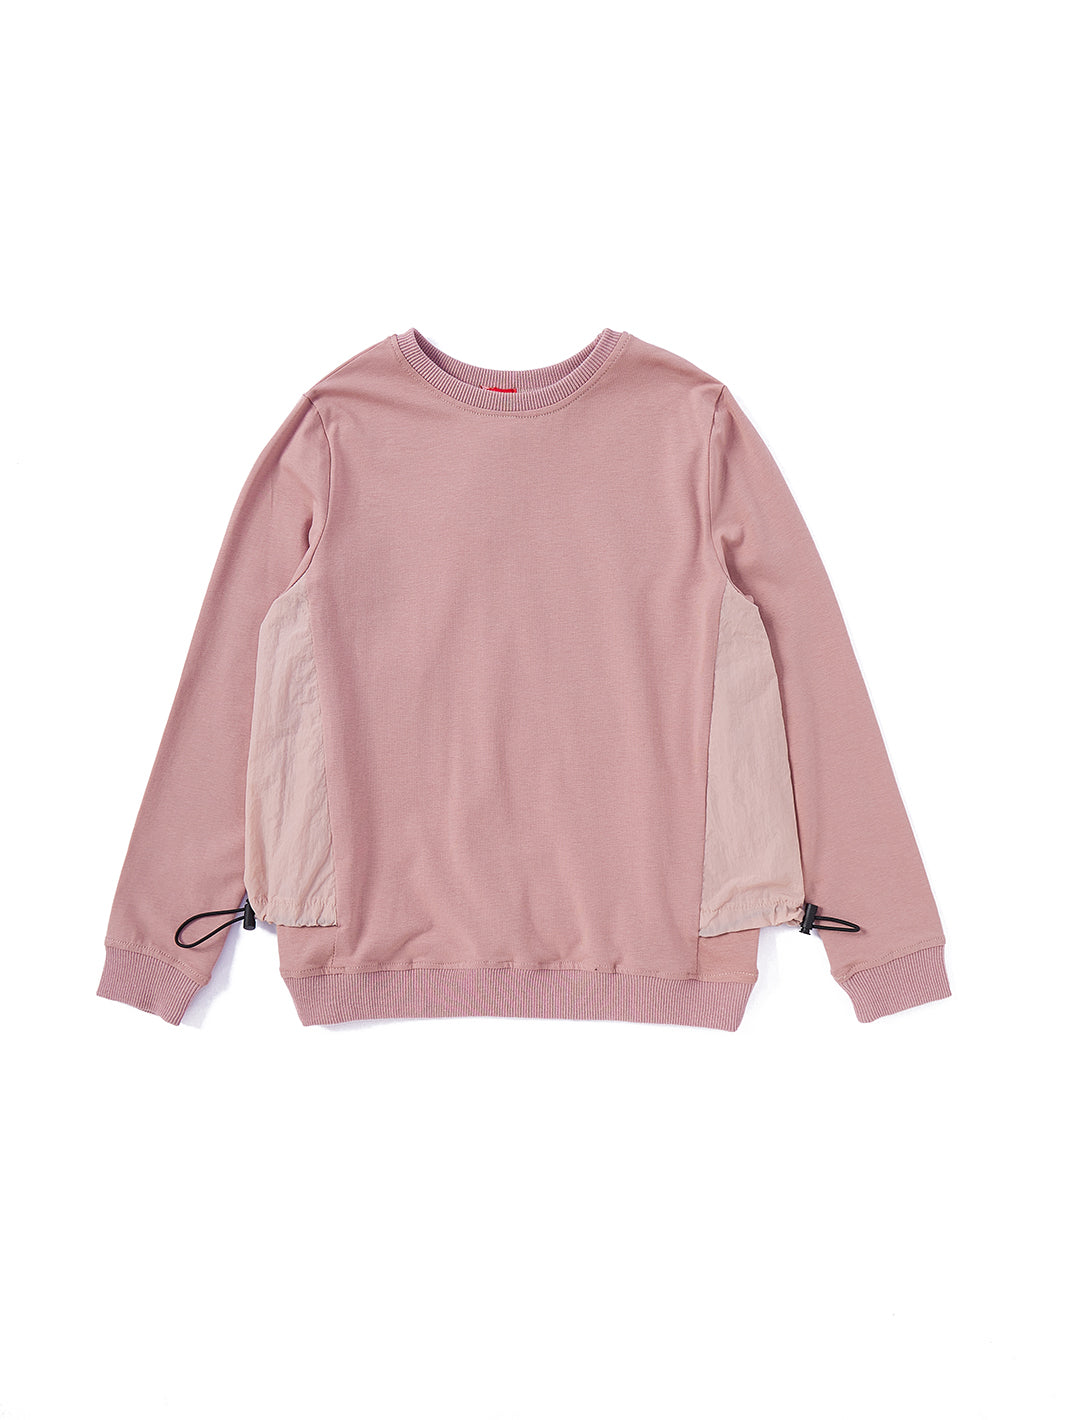 Side Insert Combo Top - Blush Pink